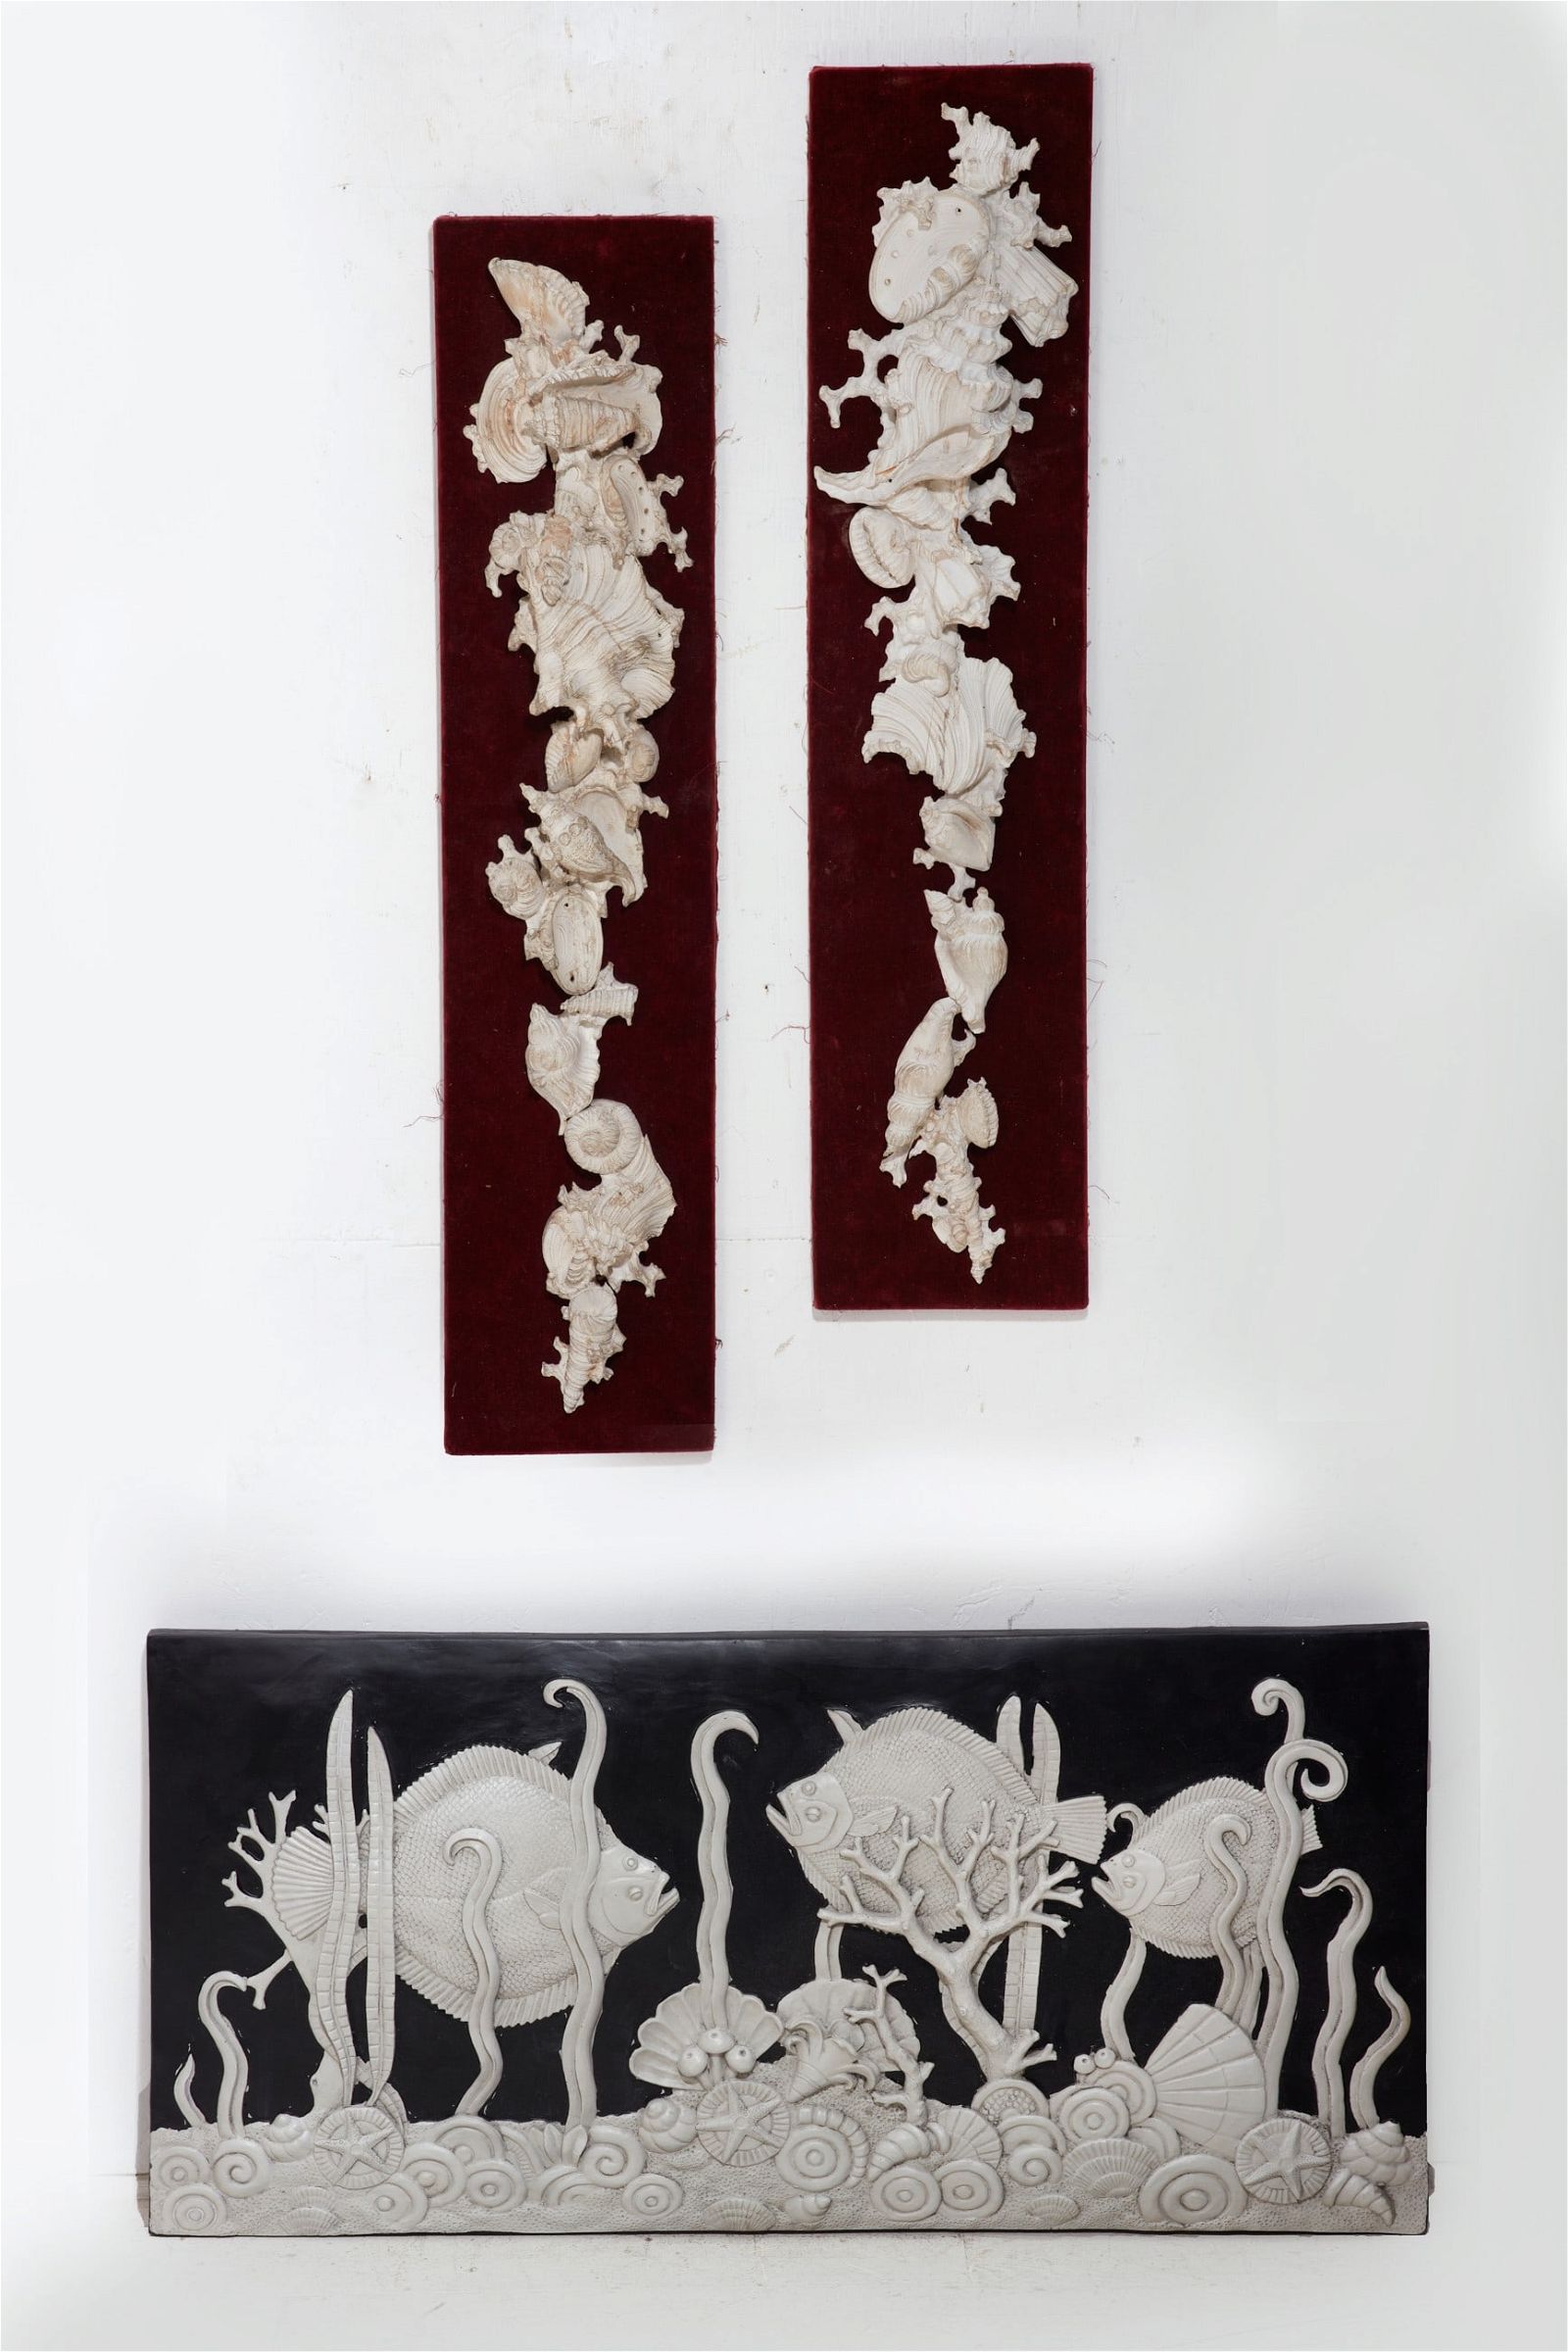 BLACK AND WHITE RESIN PLAQUE OF